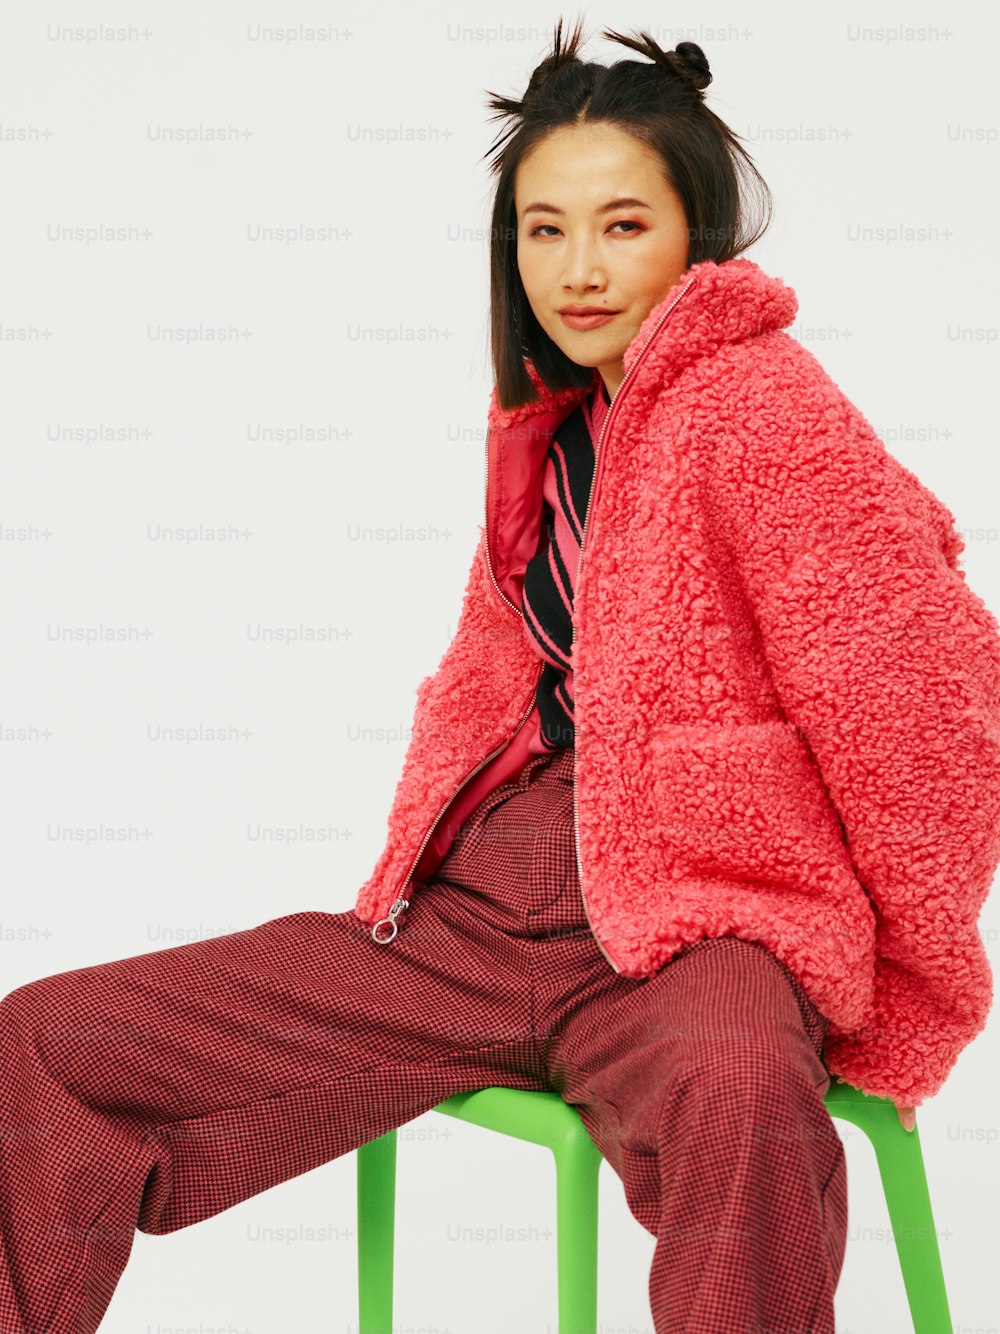 a woman sitting on a chair wearing a red jacket